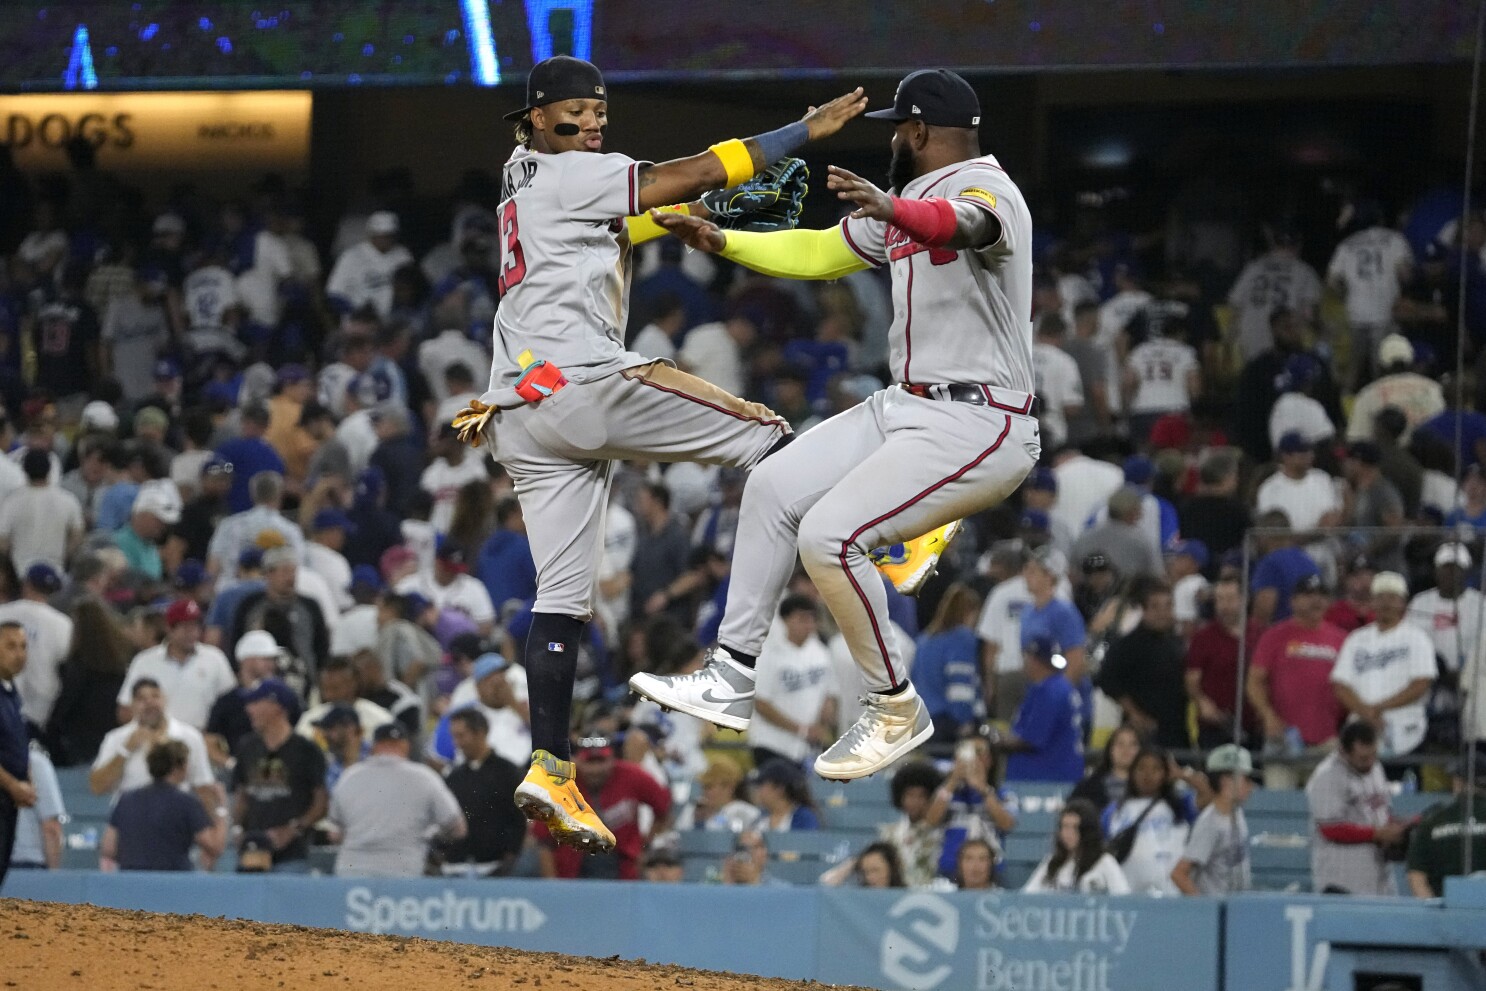 Braves star Ronald Acuña Jr. gets married, then hits grand slam to become  1st 30-HR, 60-SB player